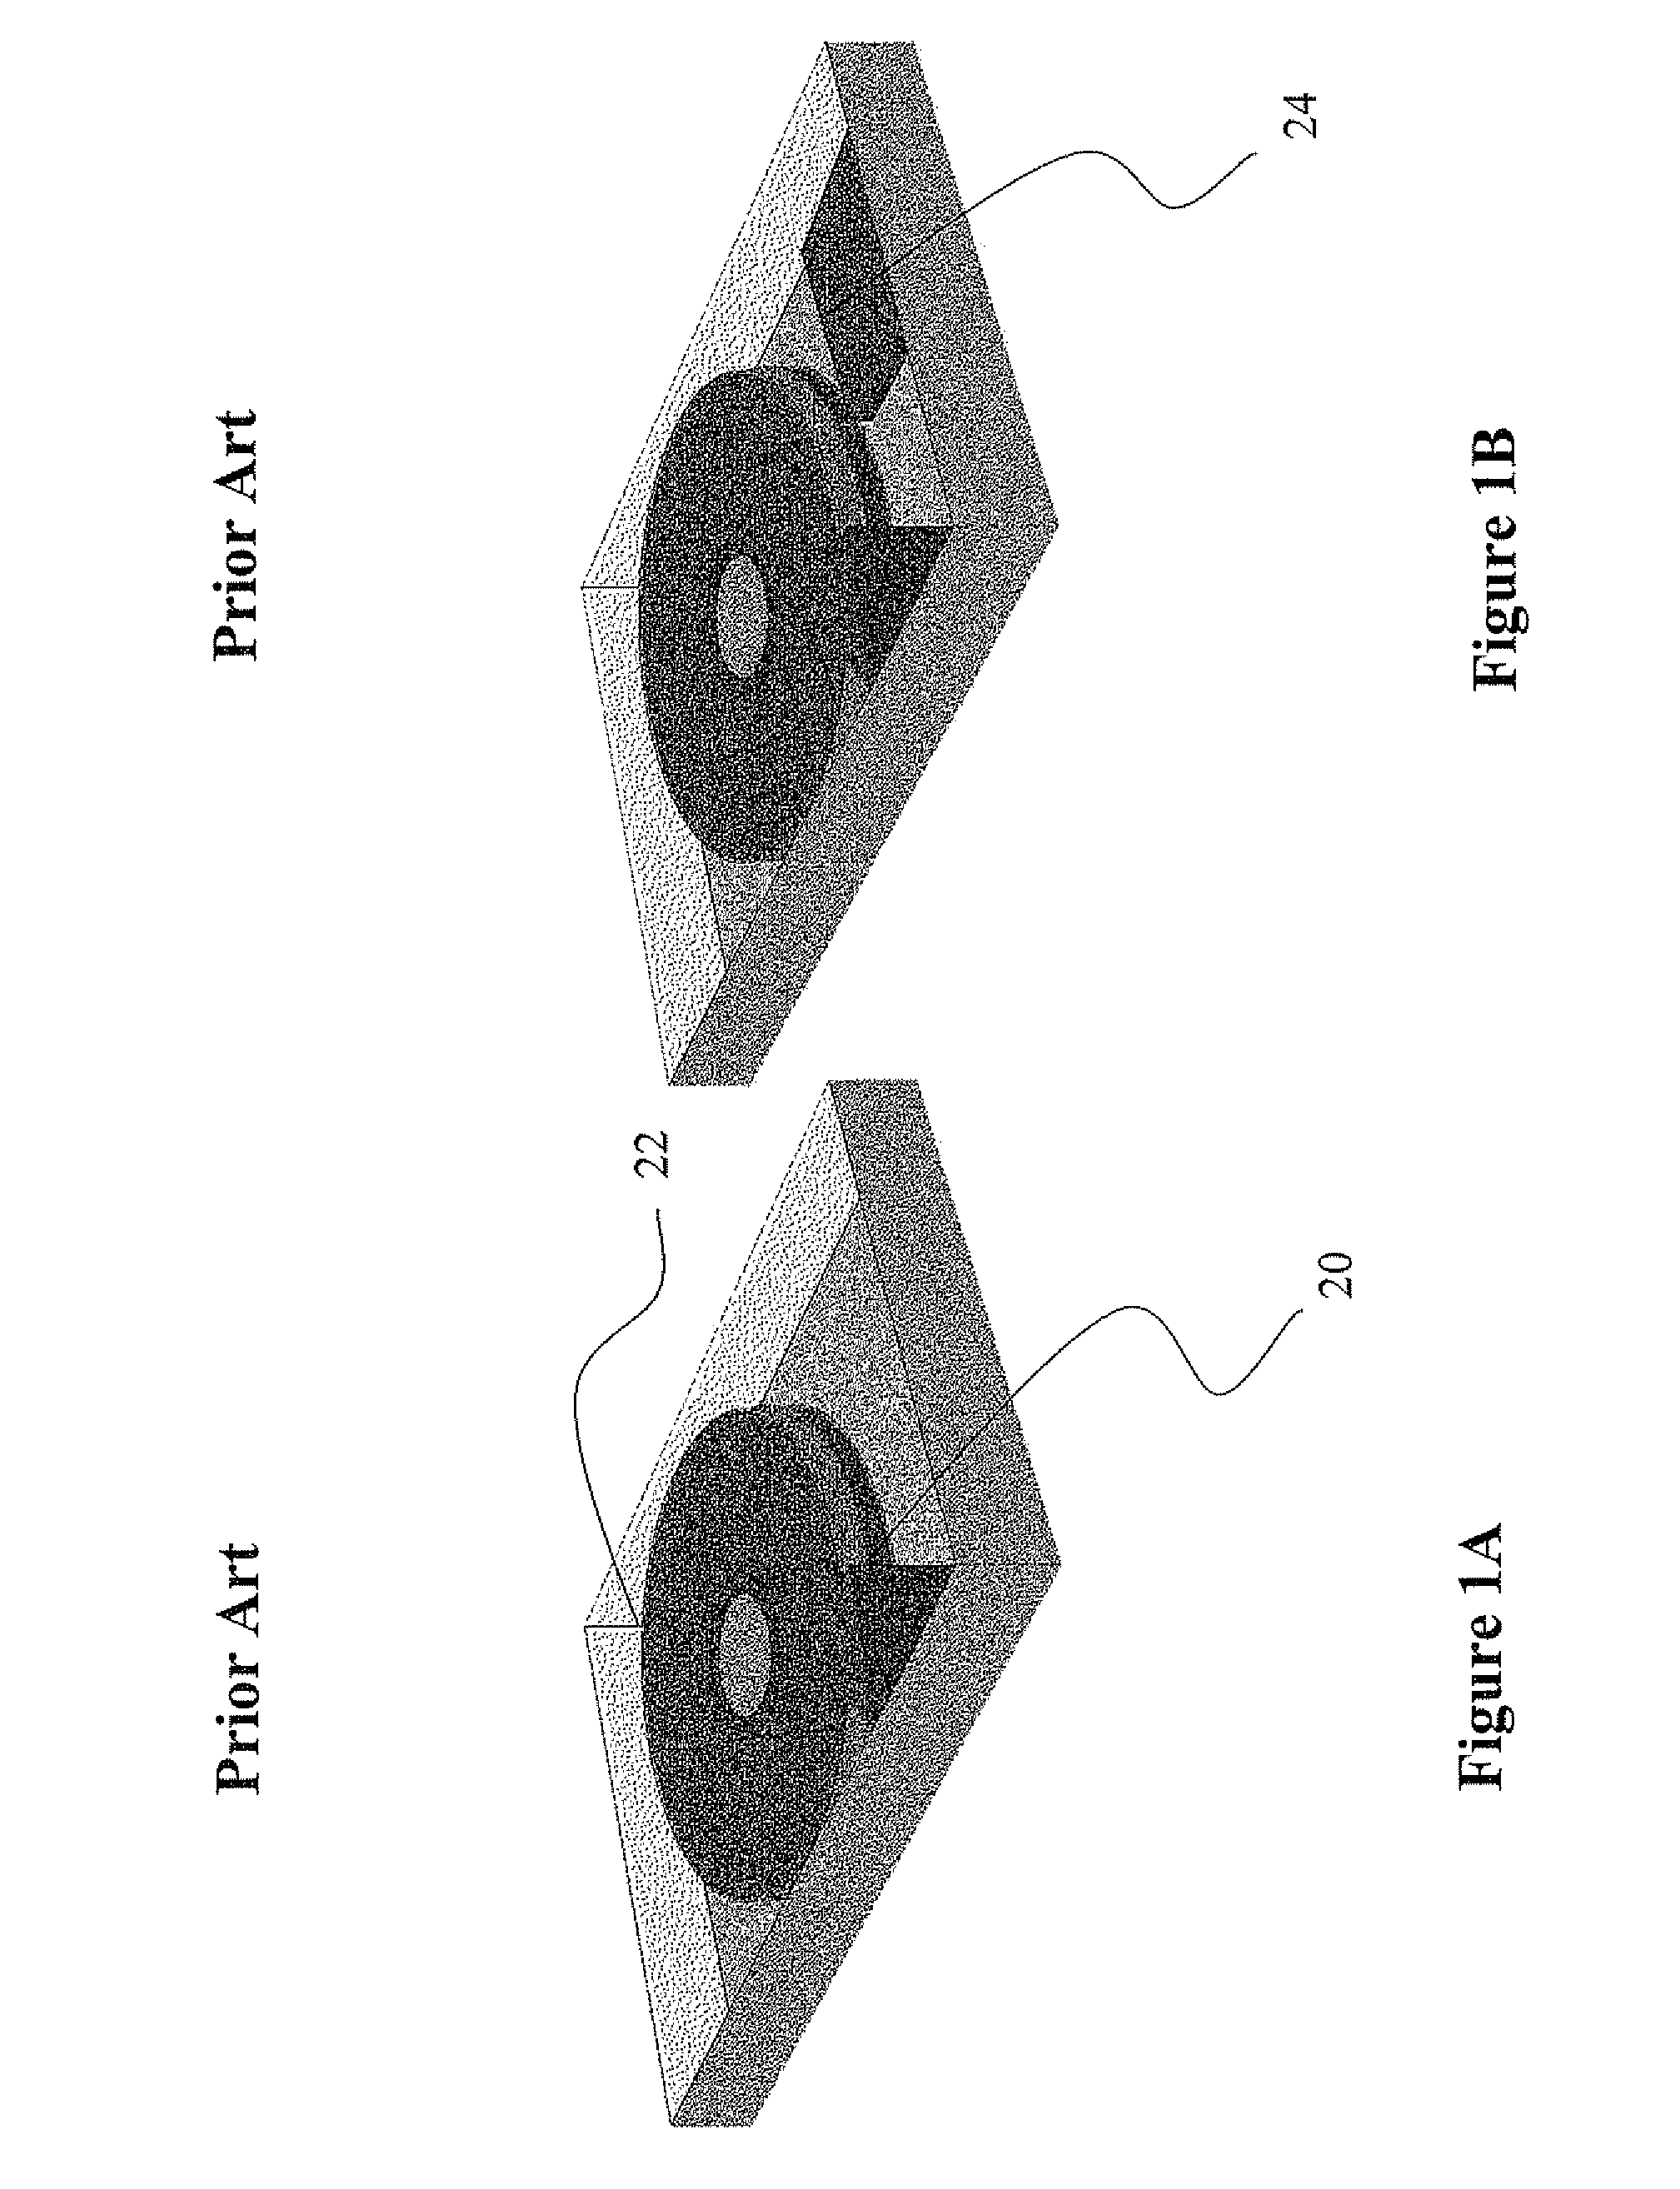 Methods For Supporting Readydrive And Readyboost Accelerators In A Single Flash-Memory Storage Device